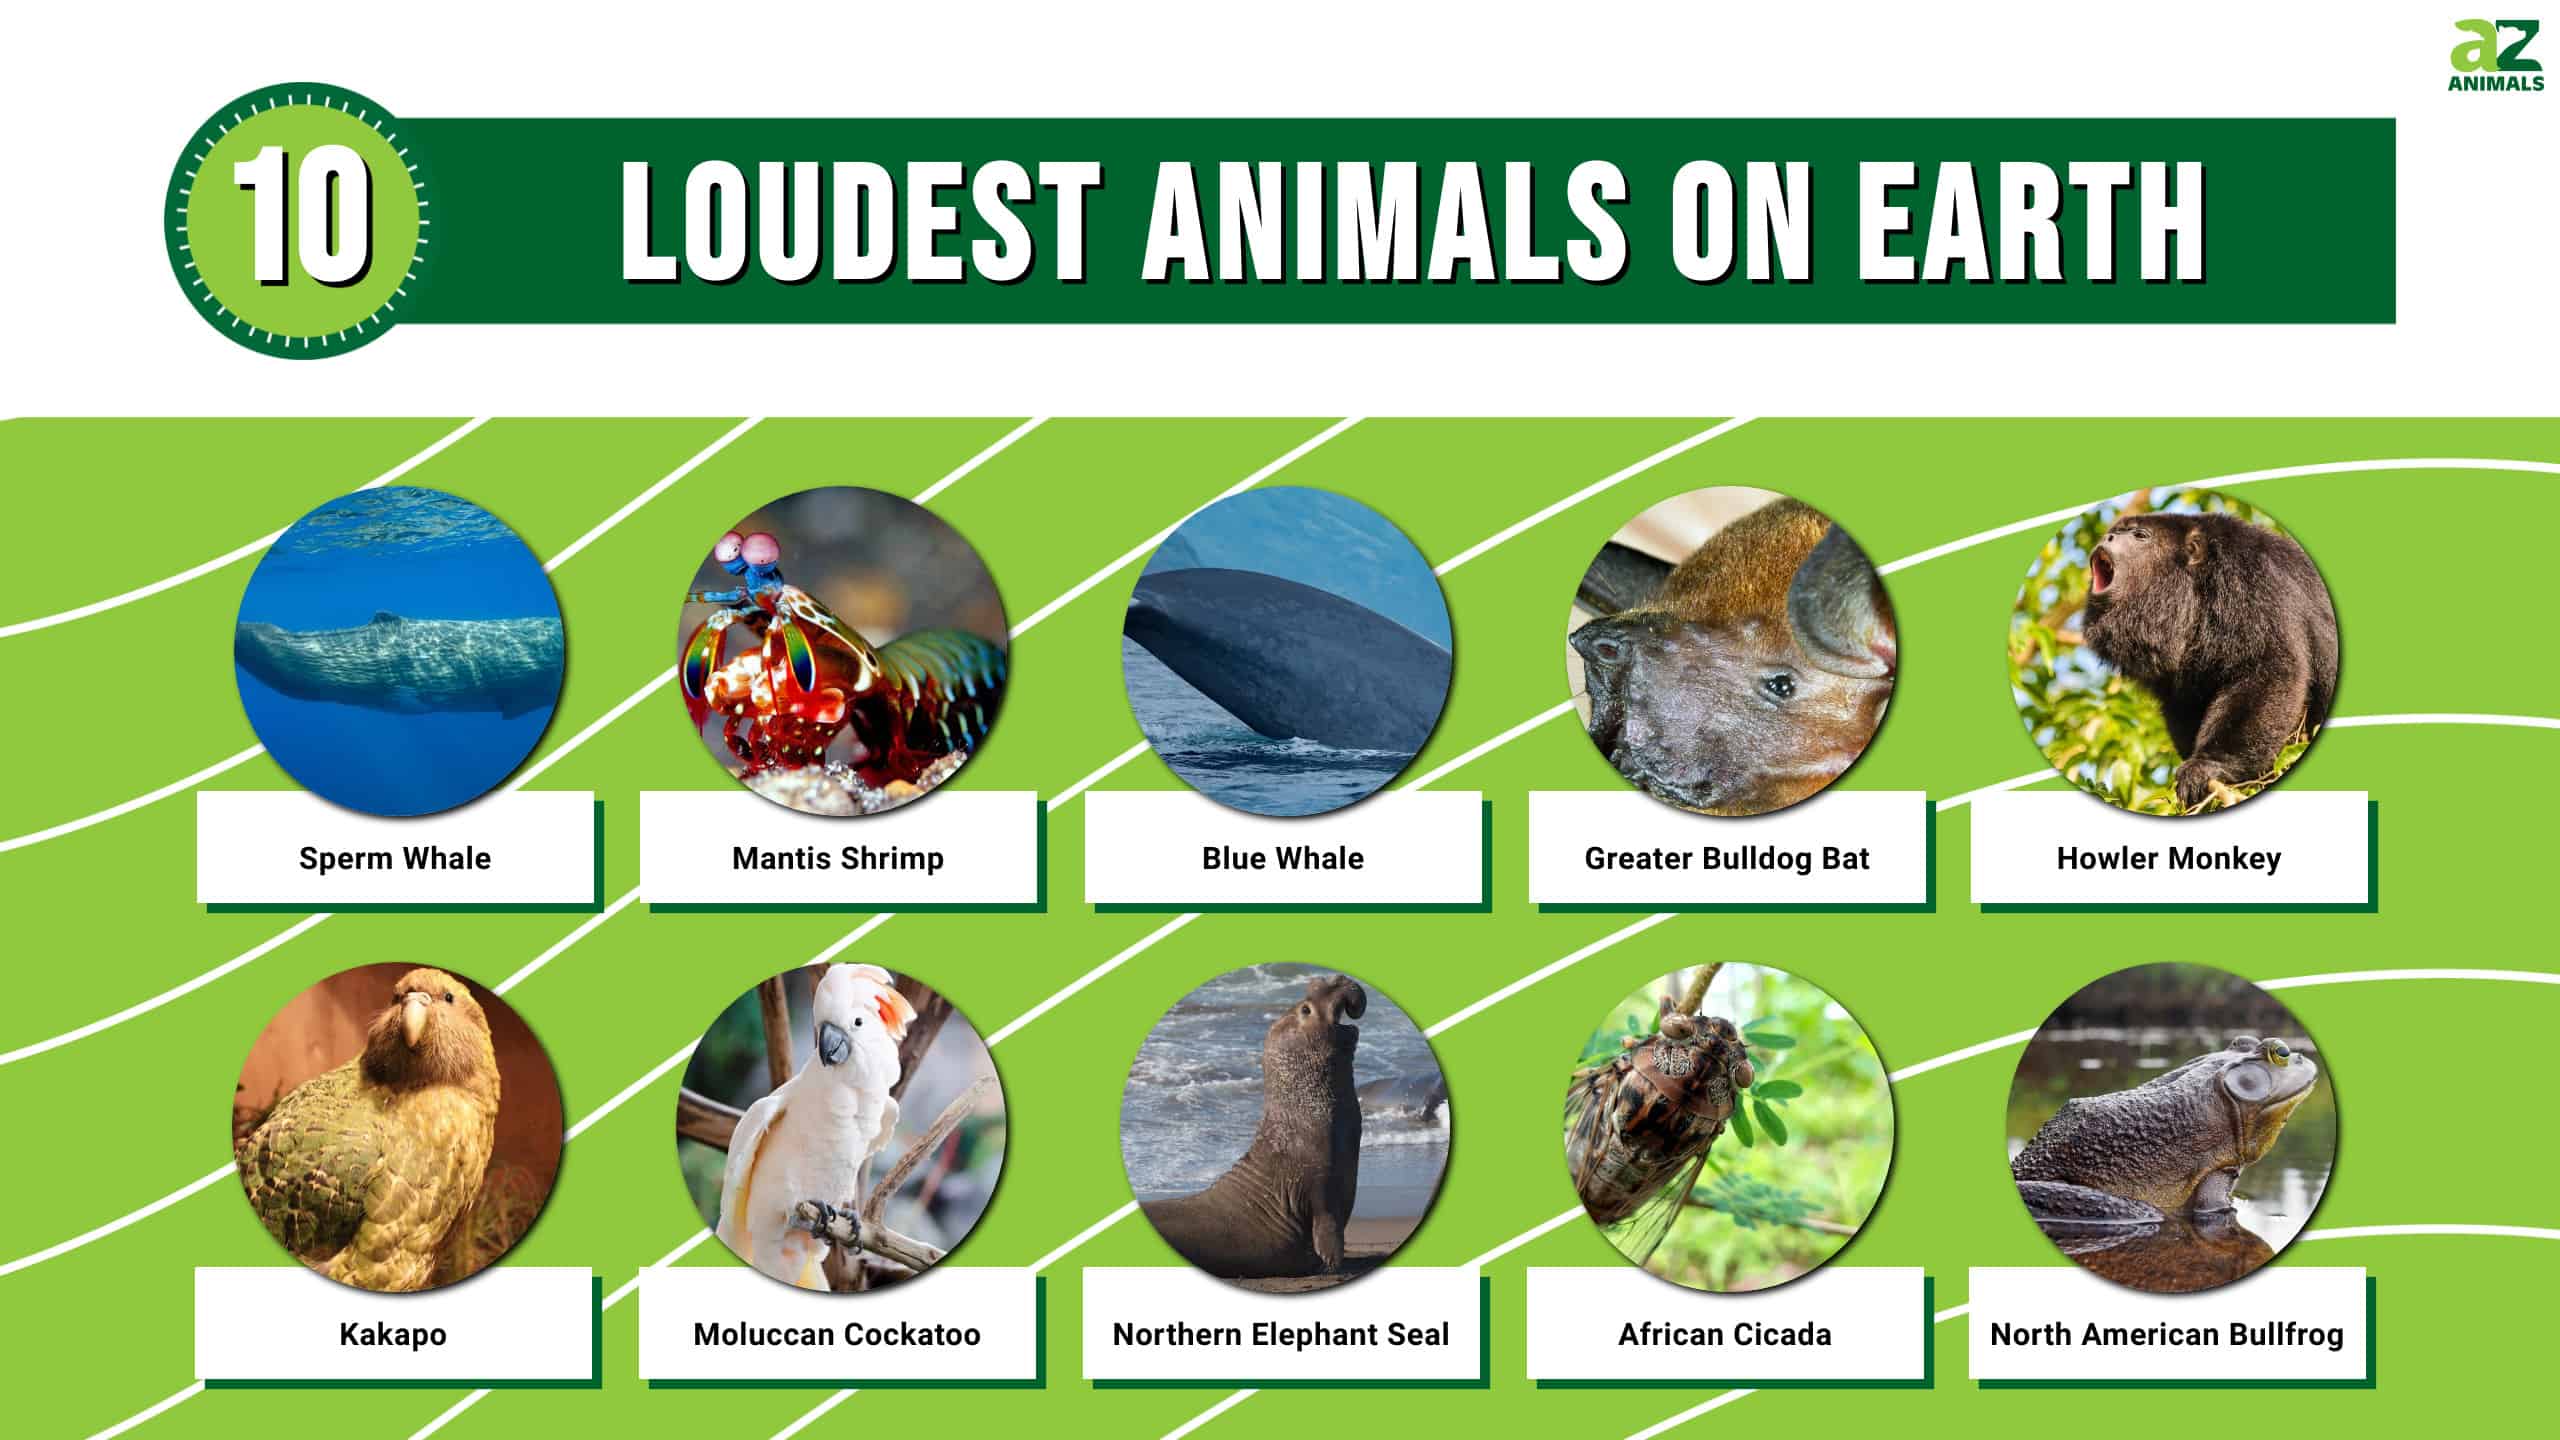 Infographic for the 10 Loudest Animals on Earth